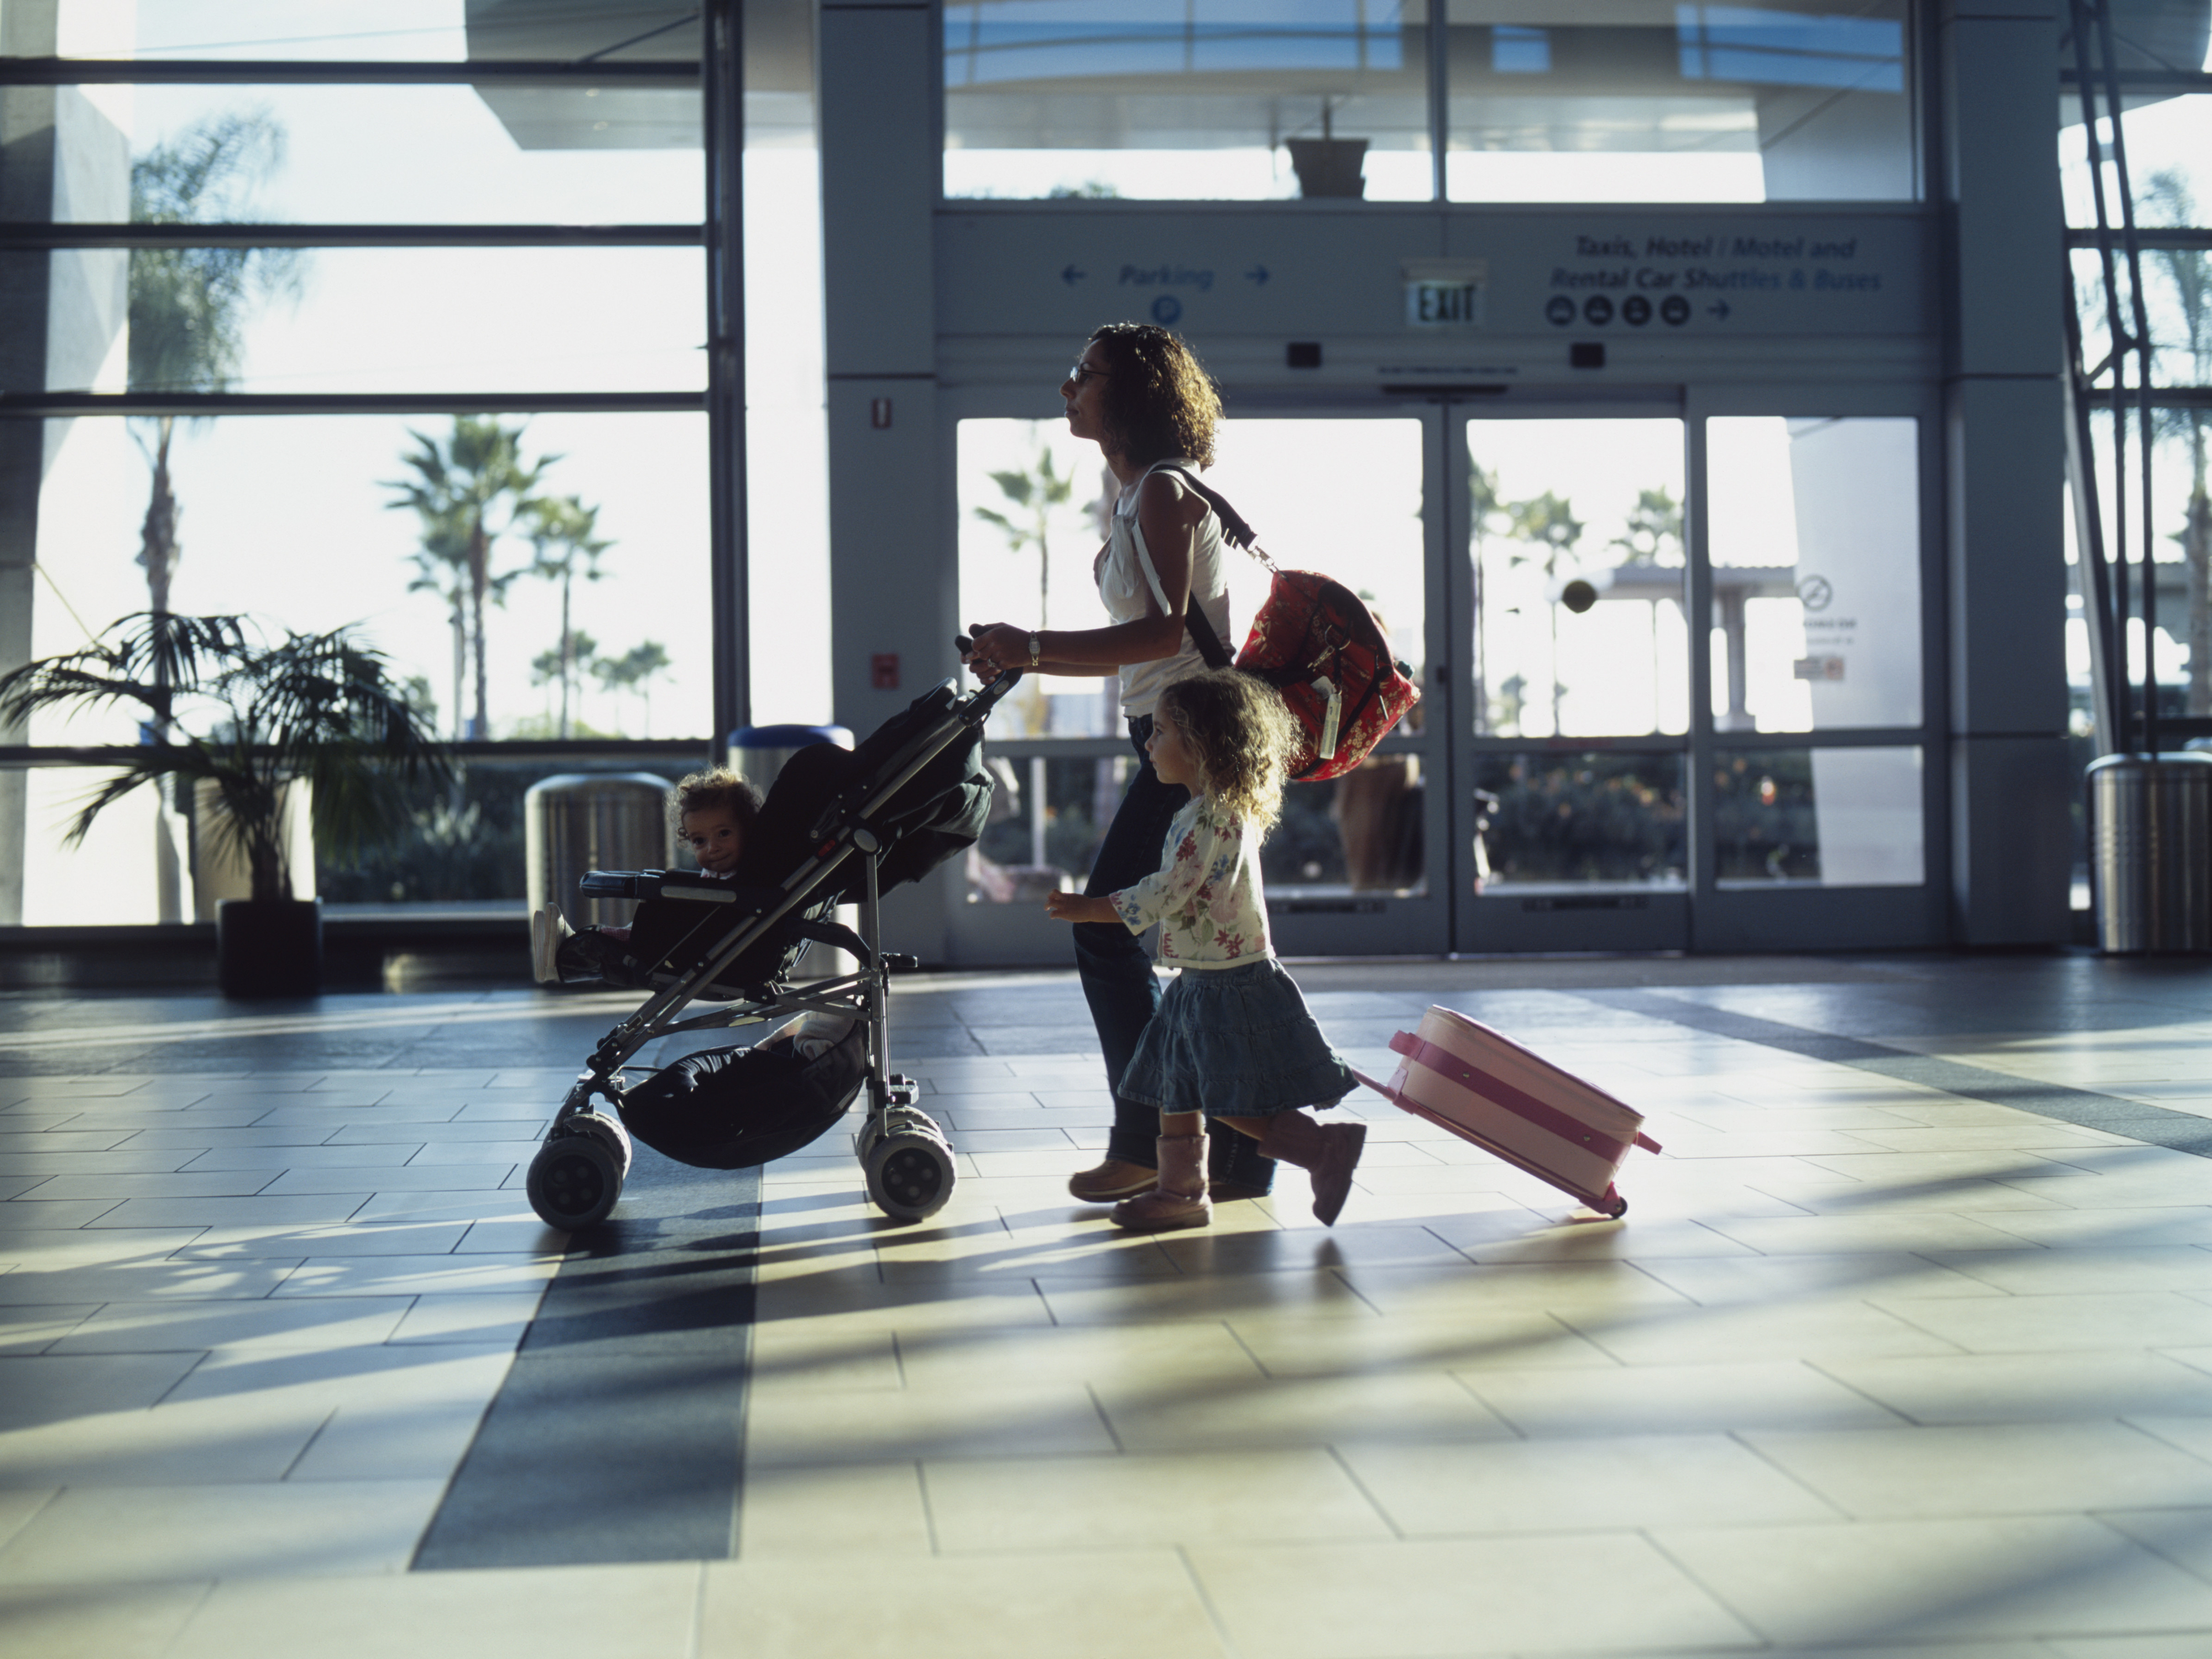 A woman pushes a stroller with a child and walks beside another child pulling a suitcase through an airport terminal